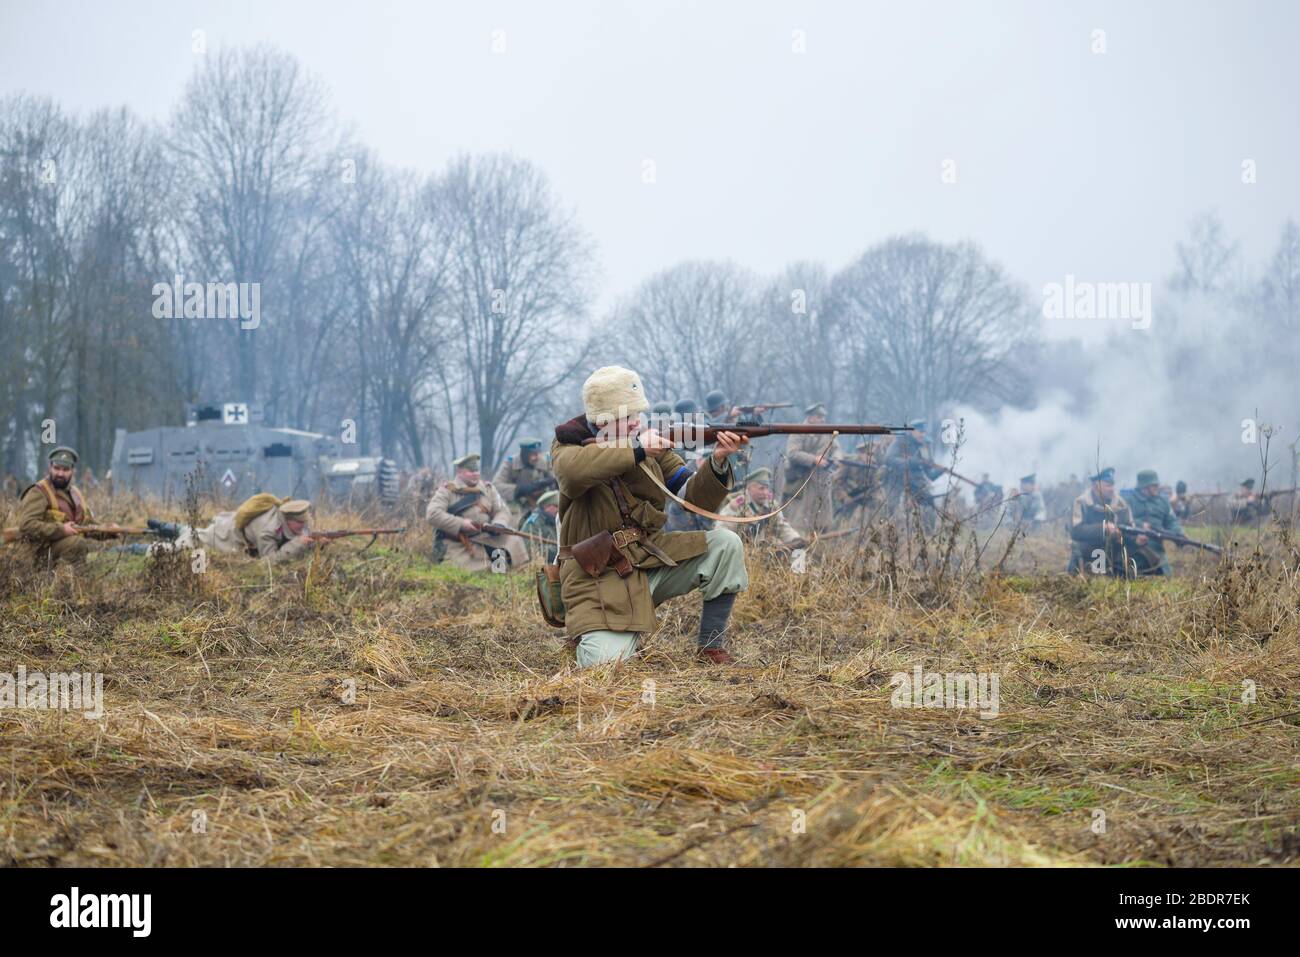 GATCHINA, RUSSIA - NOVEMBER 07, 2015: Estonian militia officer from the army of General Yudenich on the battlefield. A fragment of the international m Stock Photo